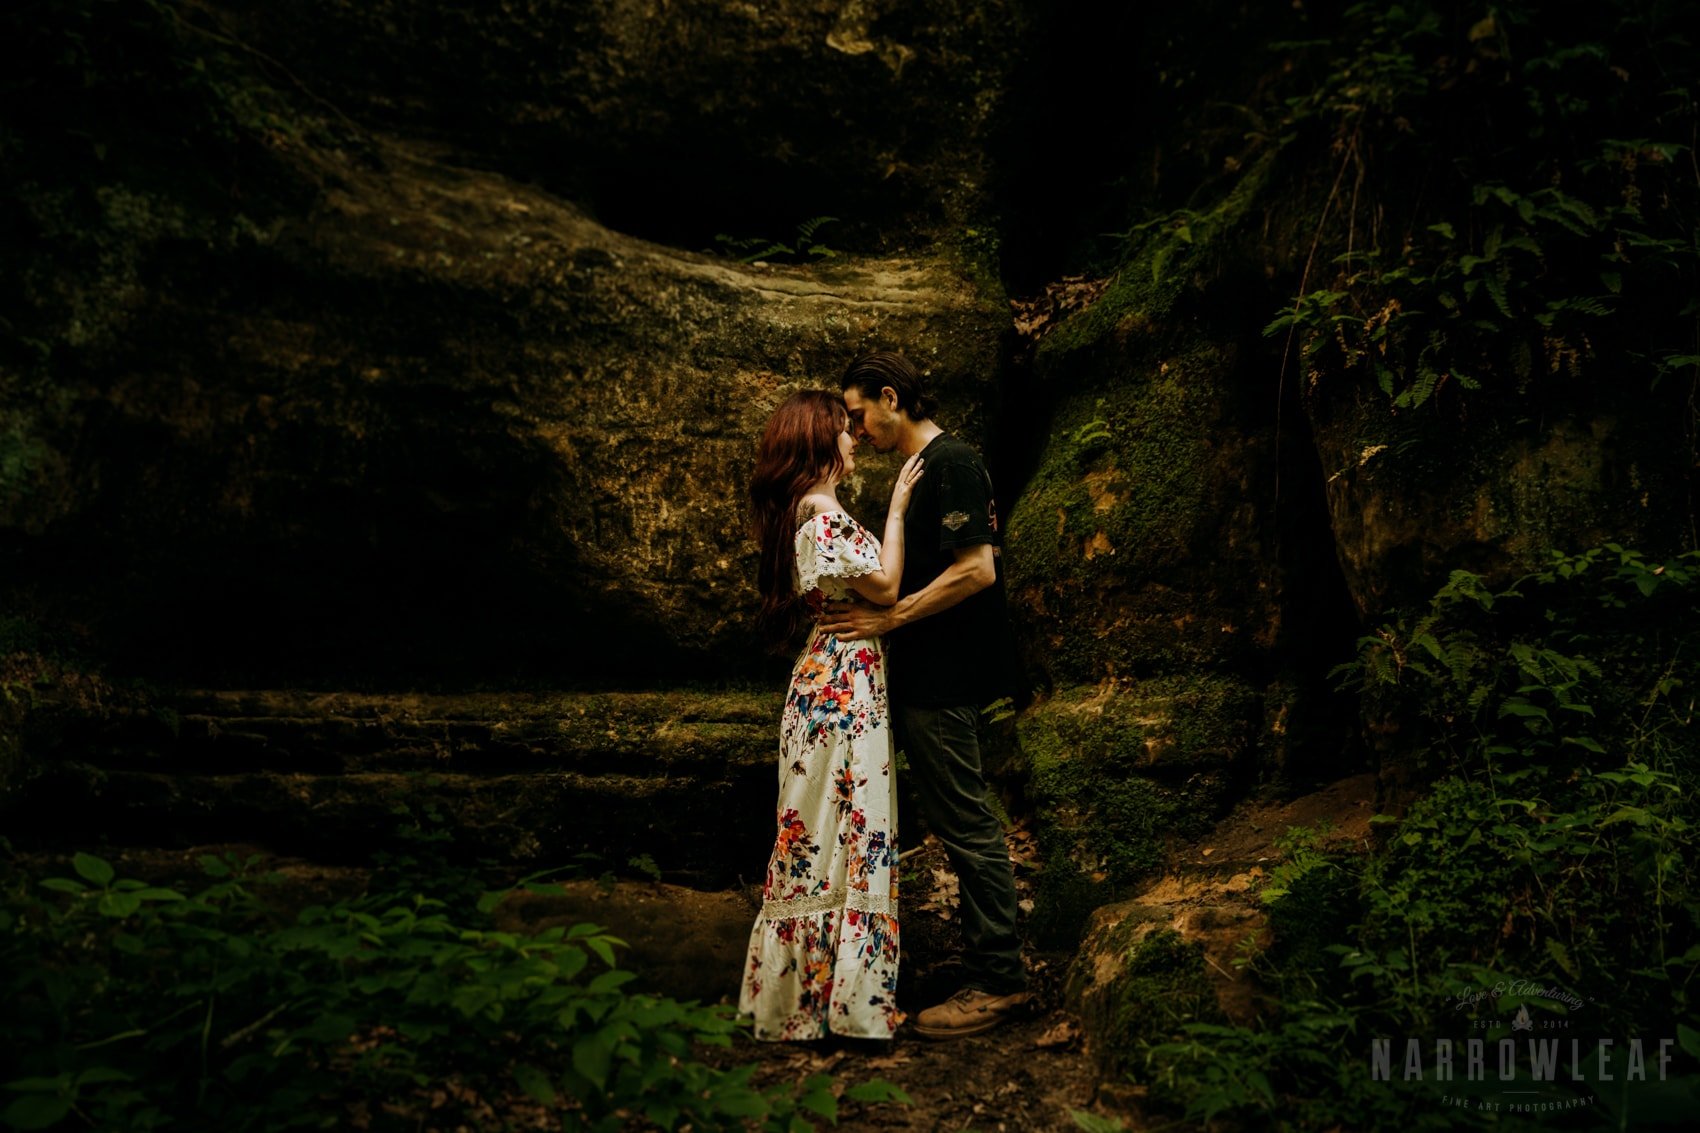 A sunny Doty Park engagement session in Neenah, Wisconsin 